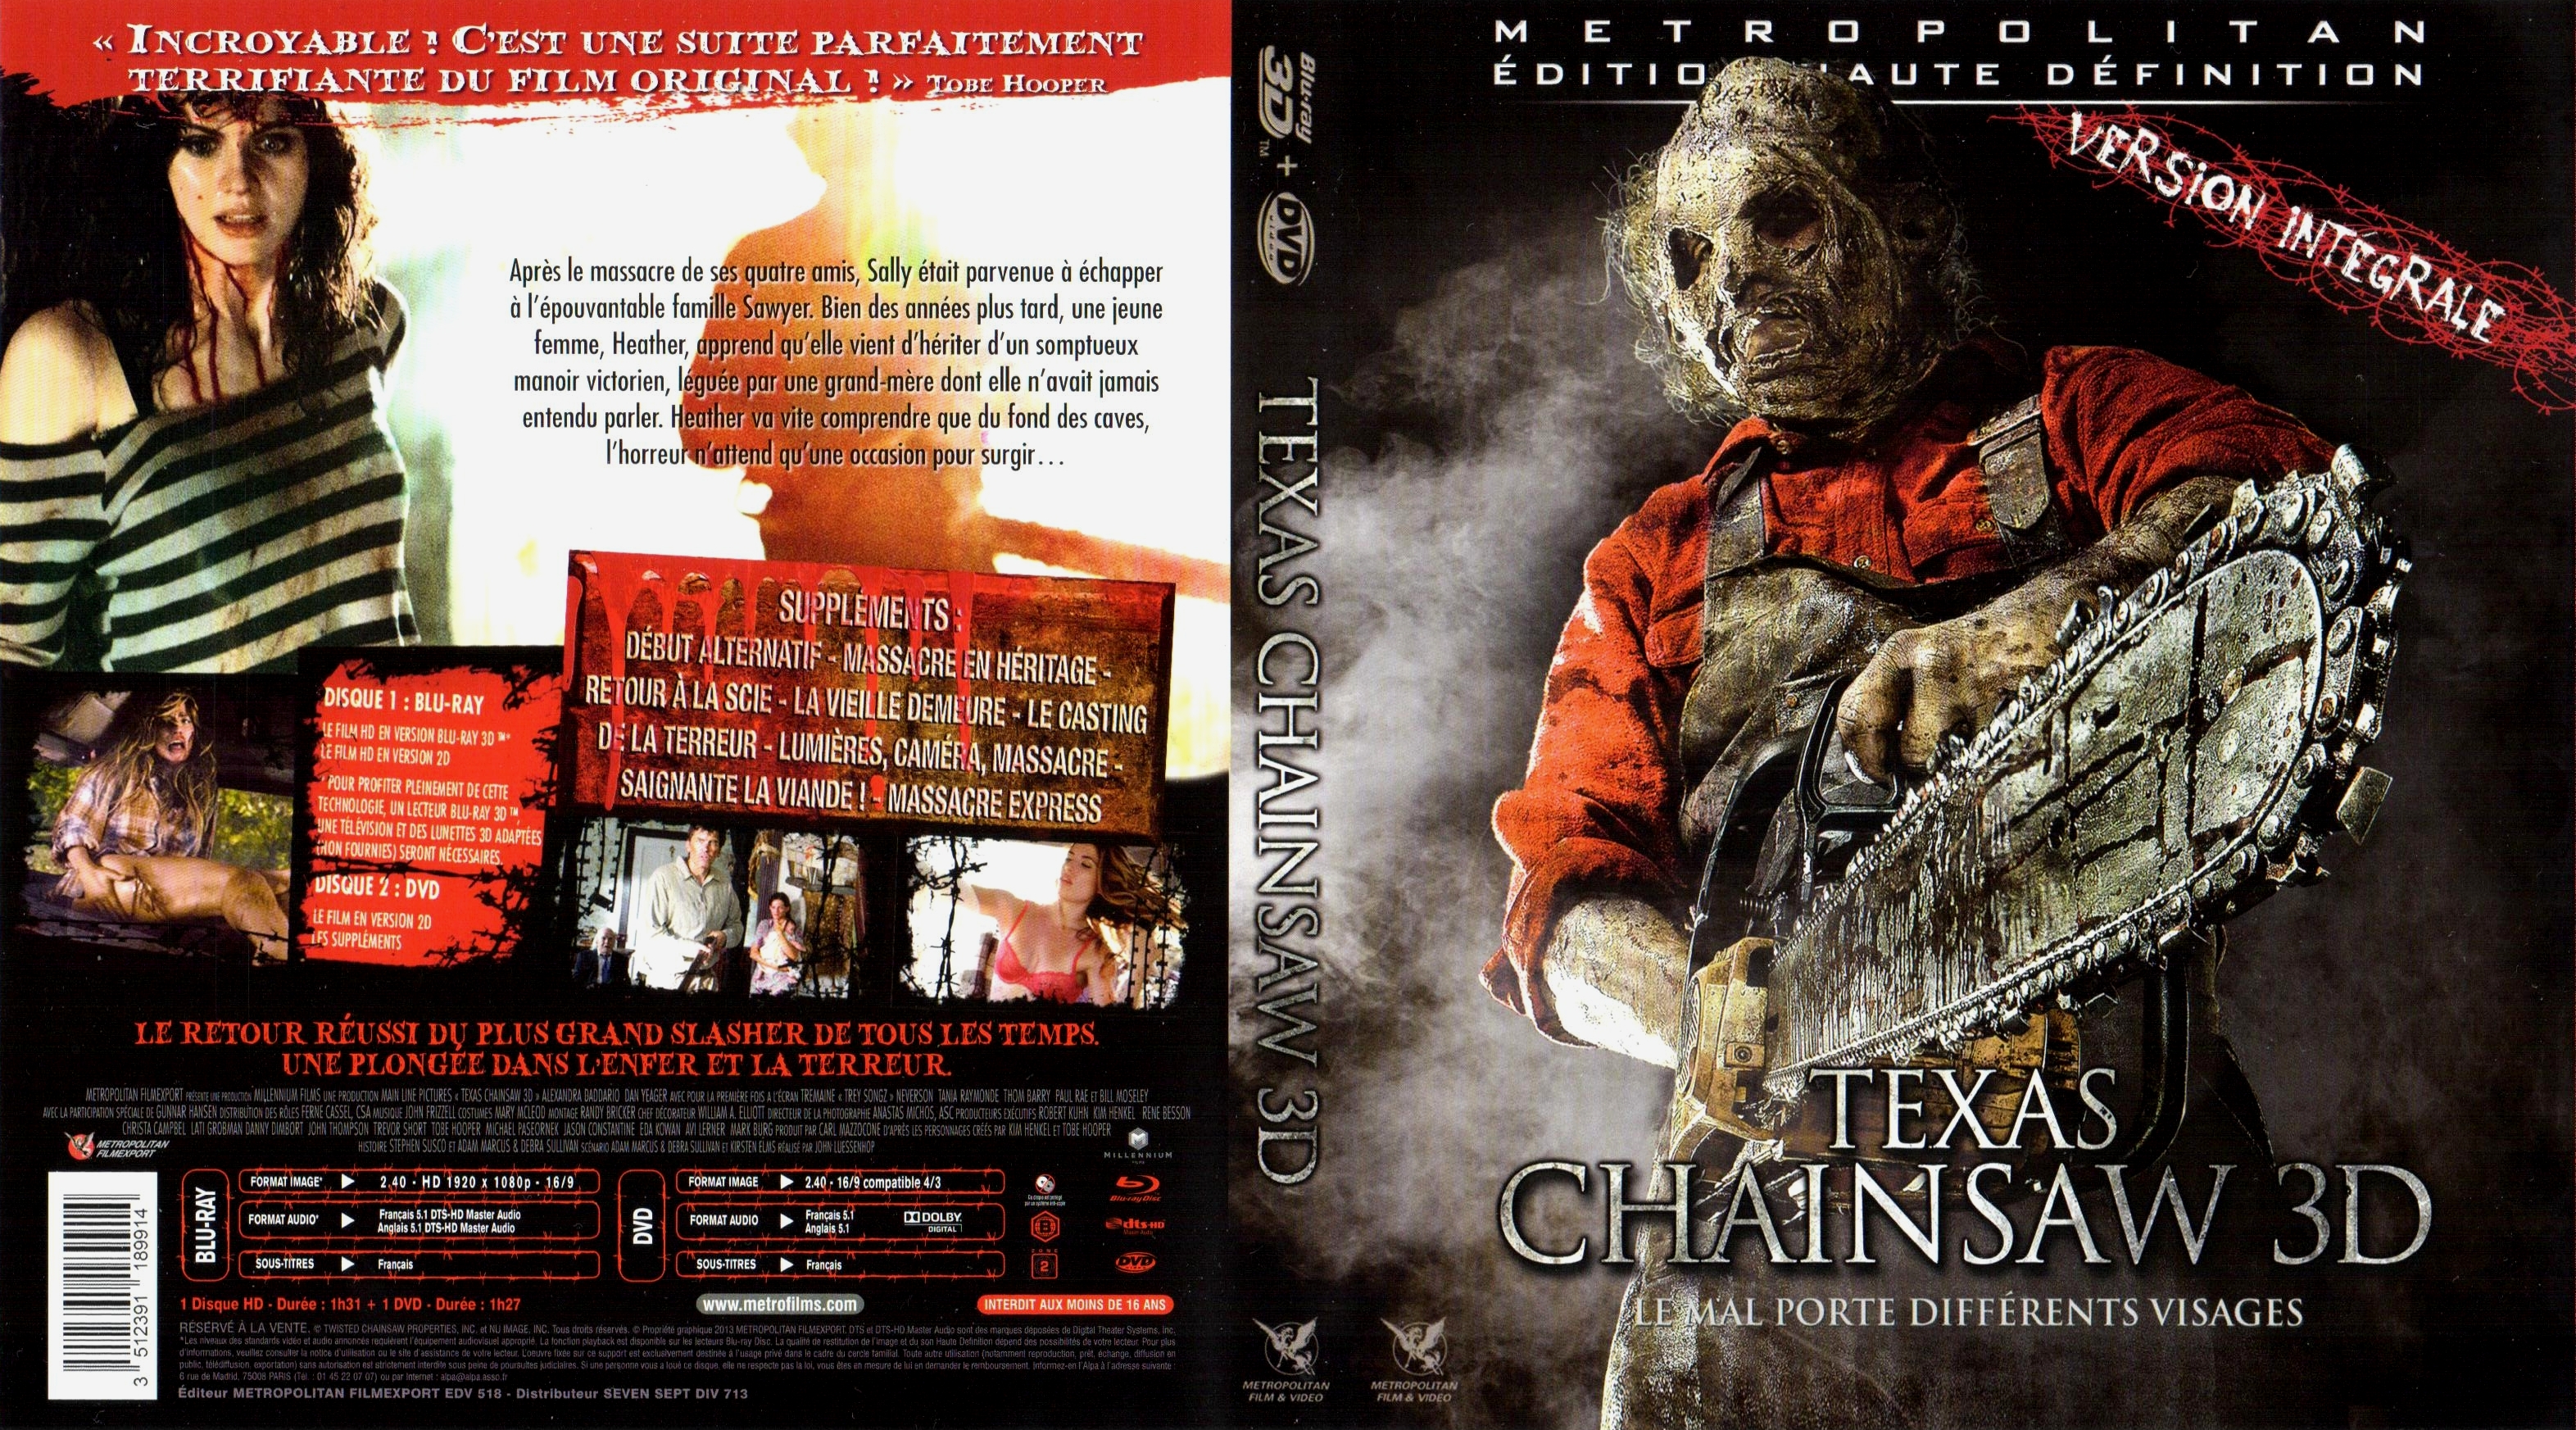 Jaquette DVD Texas Chainsaw 3D (BLU-RAY)